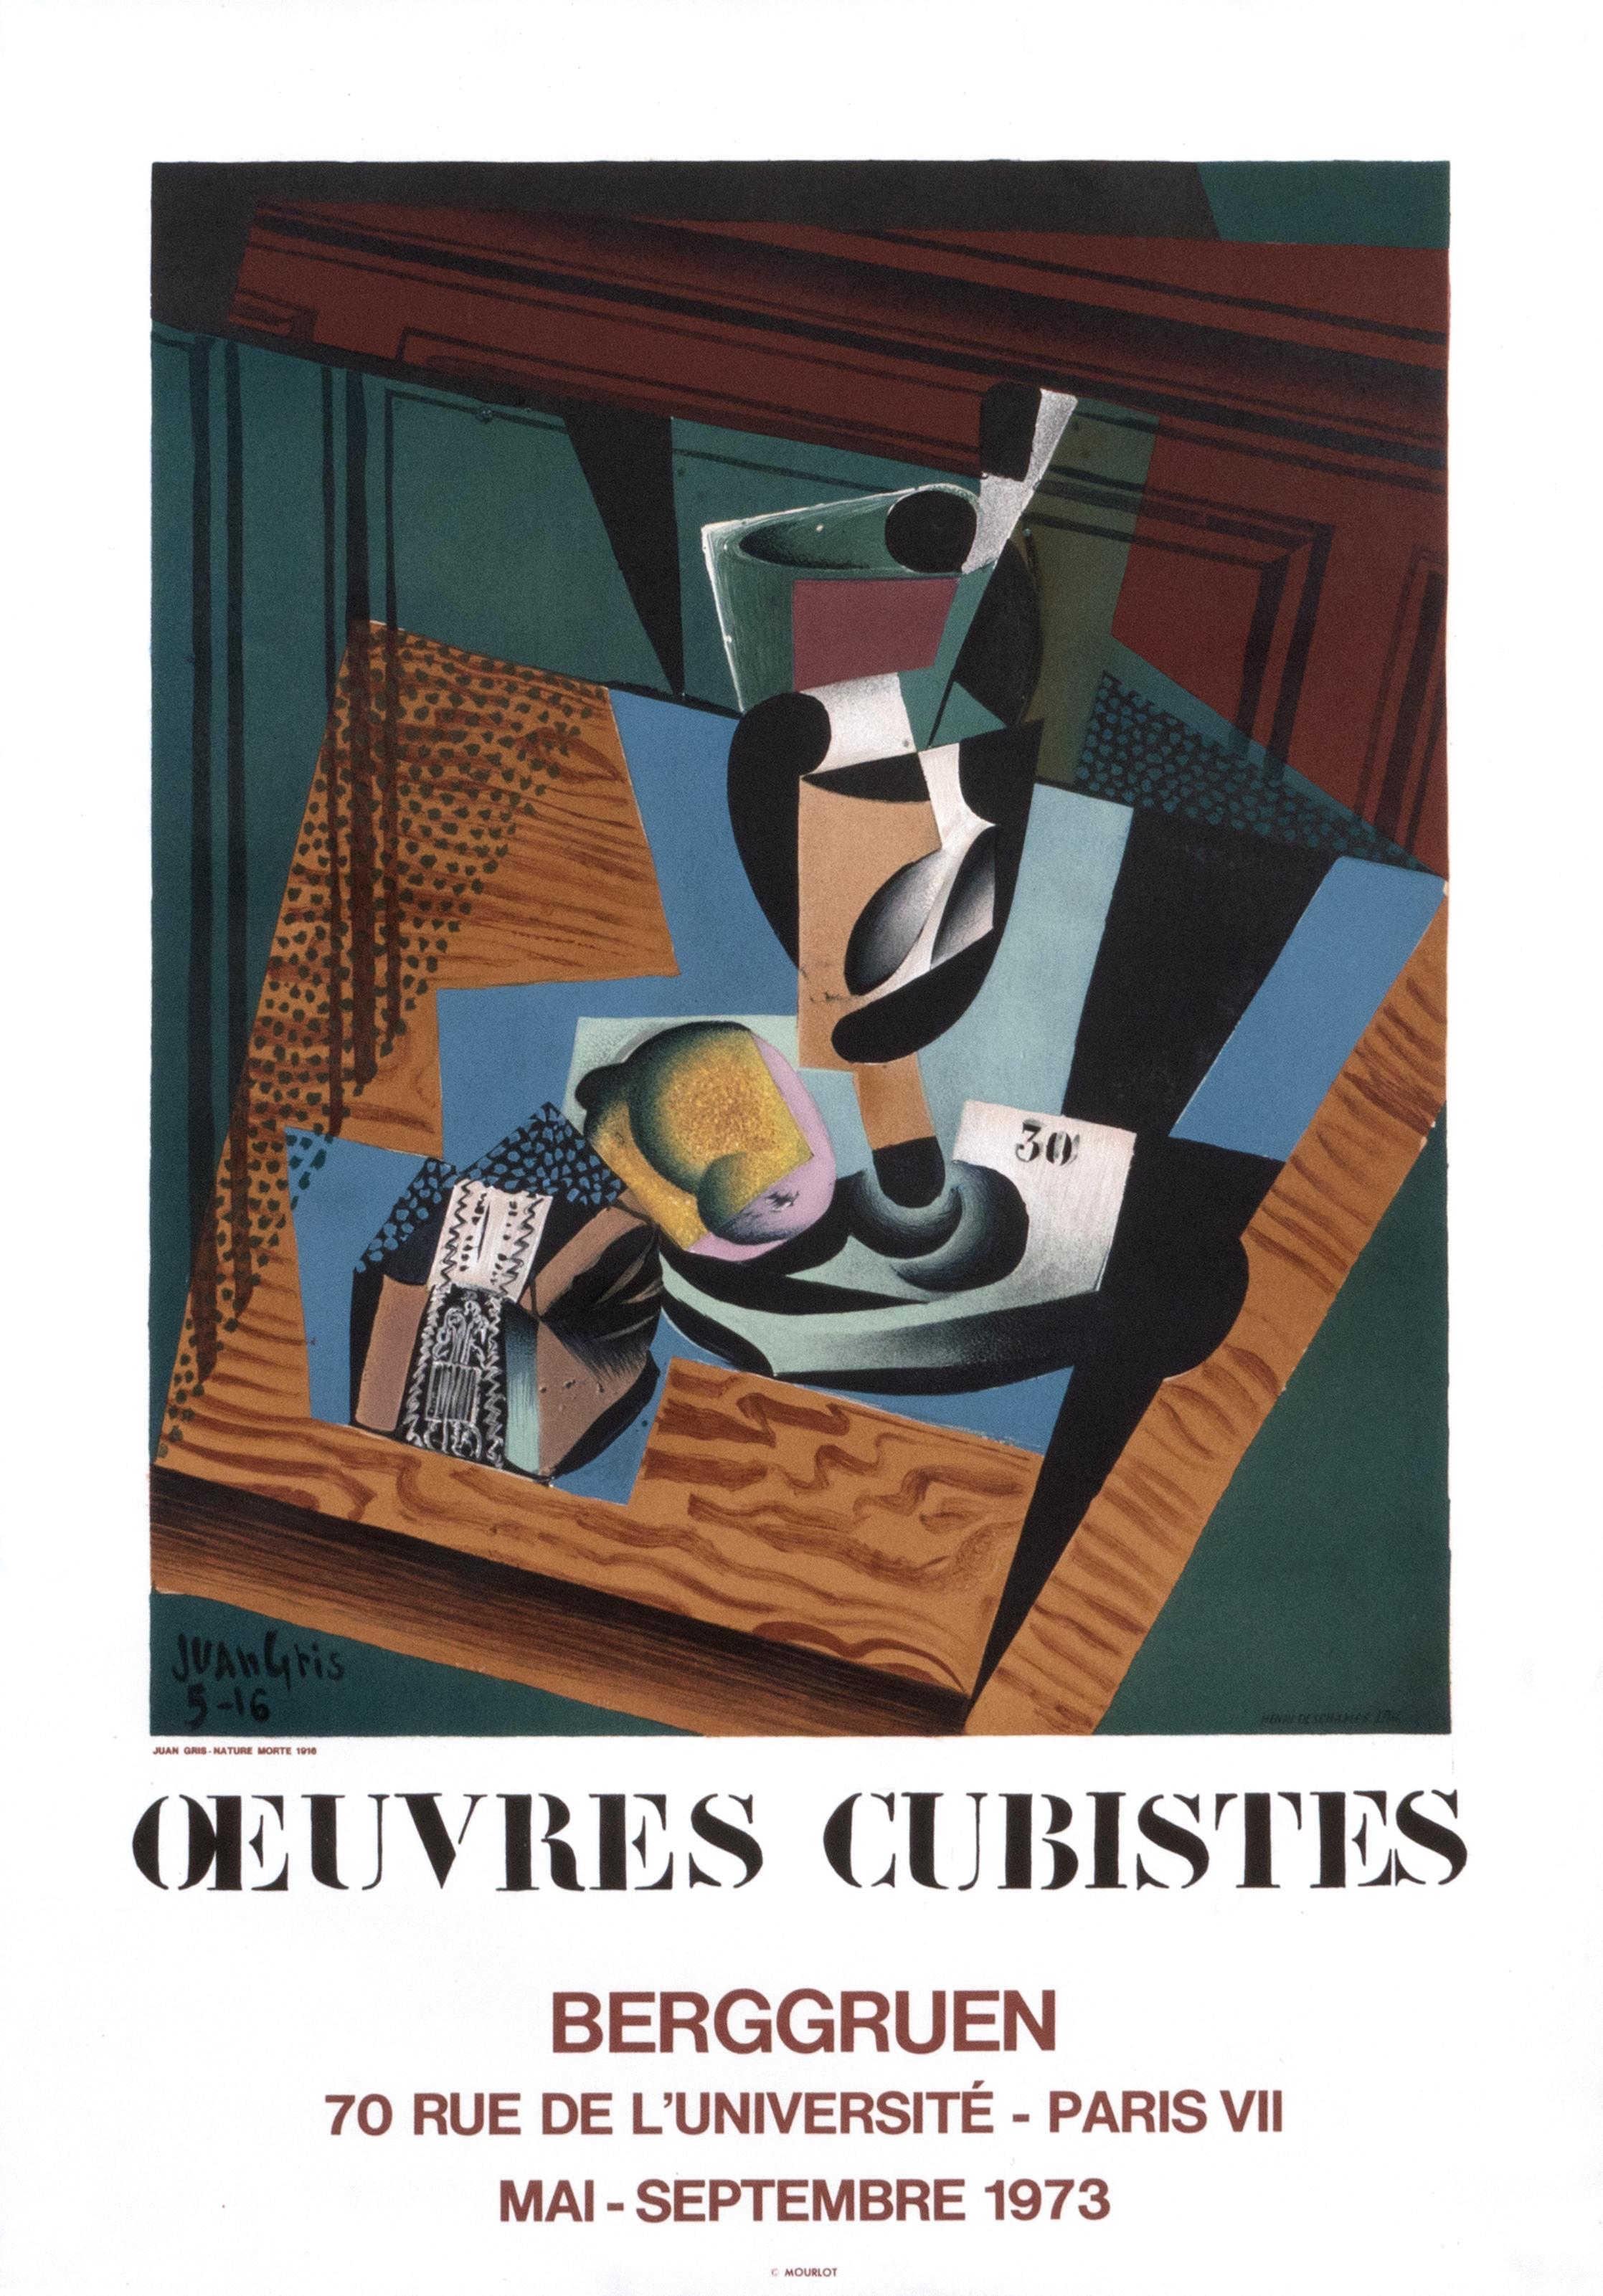 (after) Juan Gris Still-Life Print - "Oeuvres Cubistes - Berggruen" Cubist Still Life d'apres Juan Gris poster 